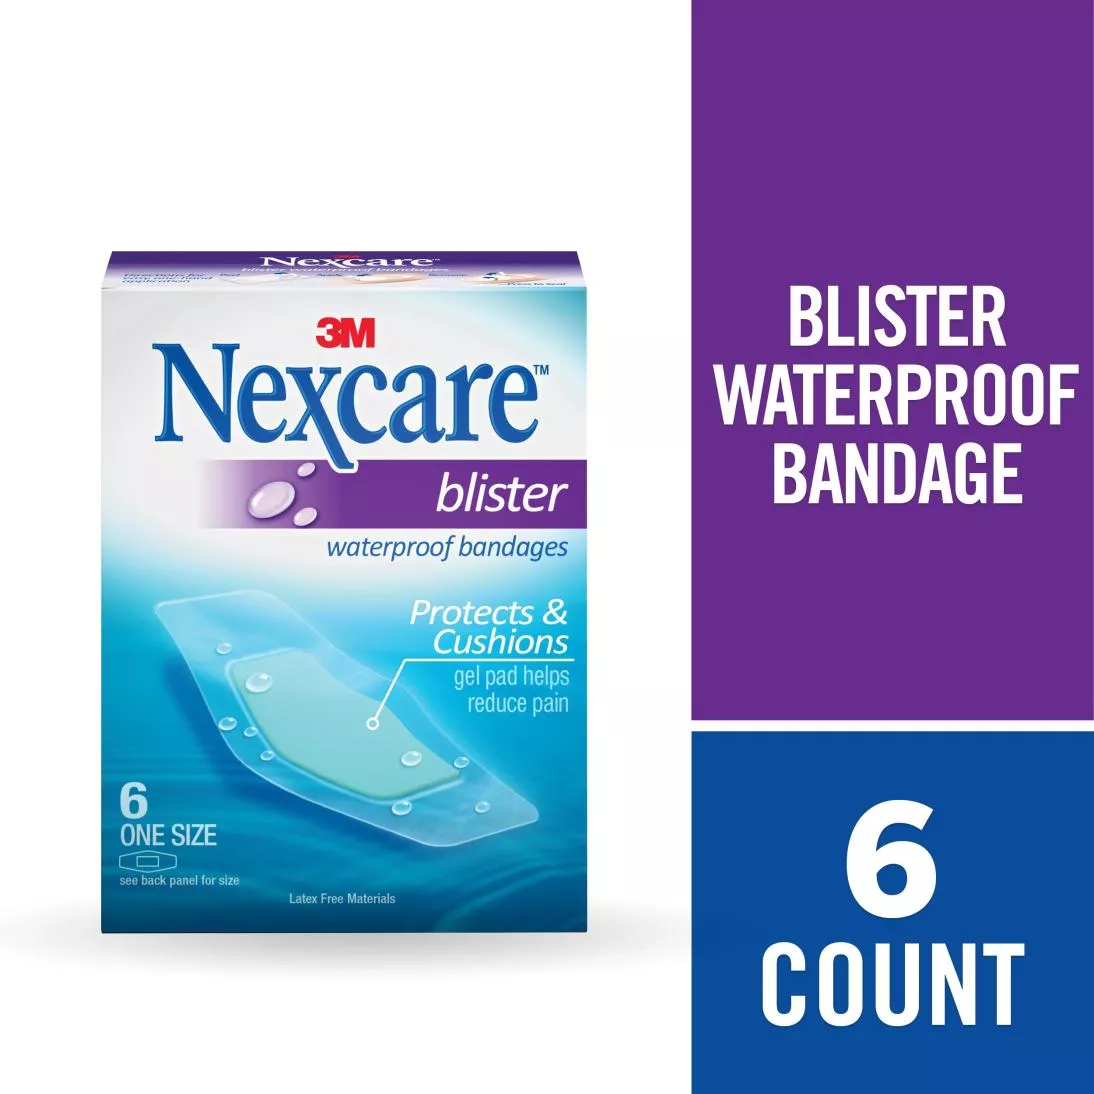 Nexcare™ Blister Waterproof Bandages BWB-06, 1 1/16 in x 2 1/4 in